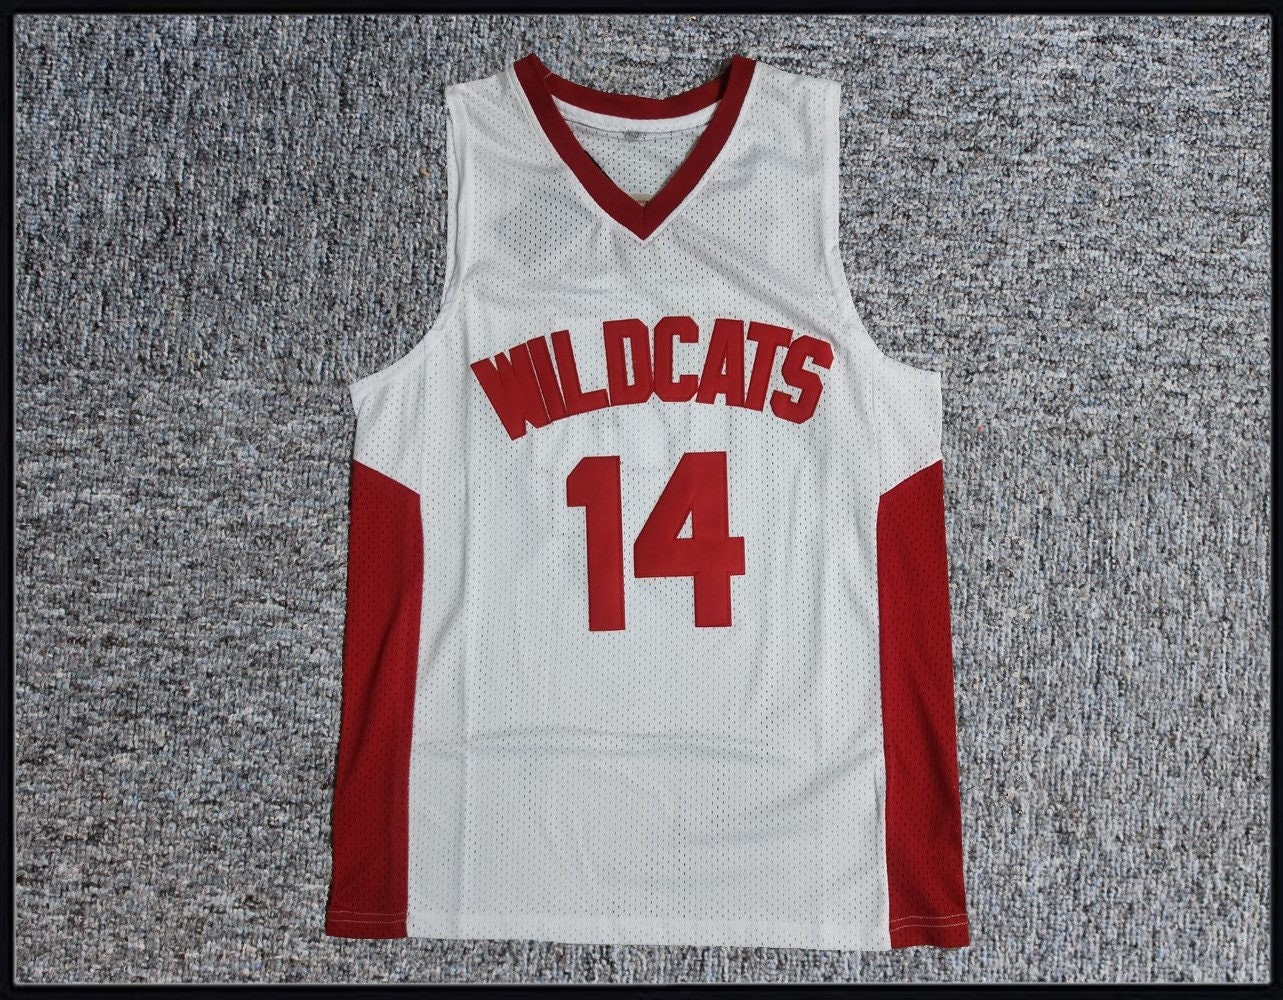  Zac E Troy Bolton 14 East High School Wildcats Red Basketball  Jersey : Sports & Outdoors